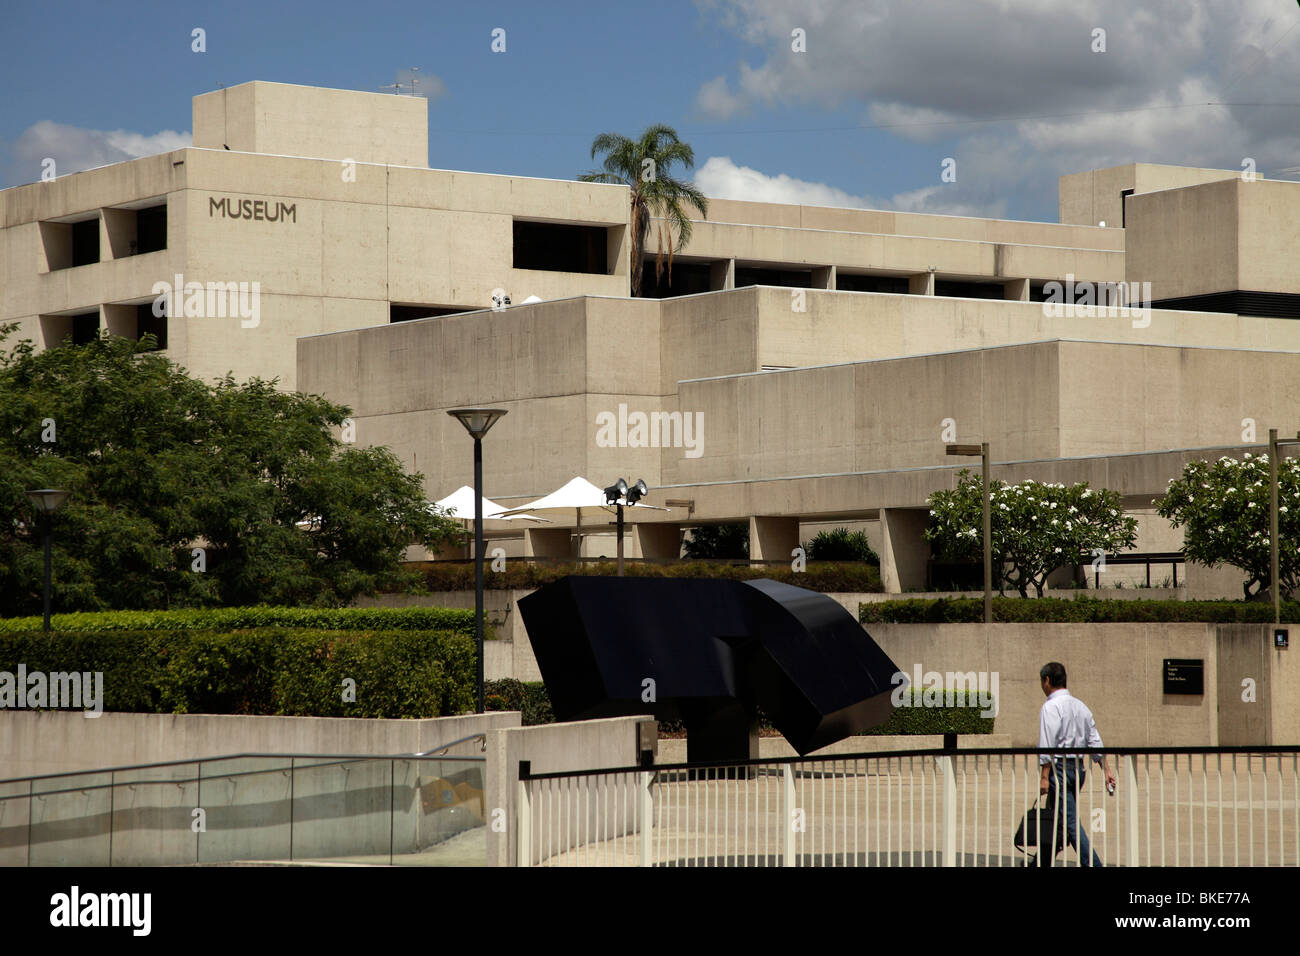 Queensland Cultural Center and Museum on South Bank in Brisbane, Queensland, Australia Stock Photo